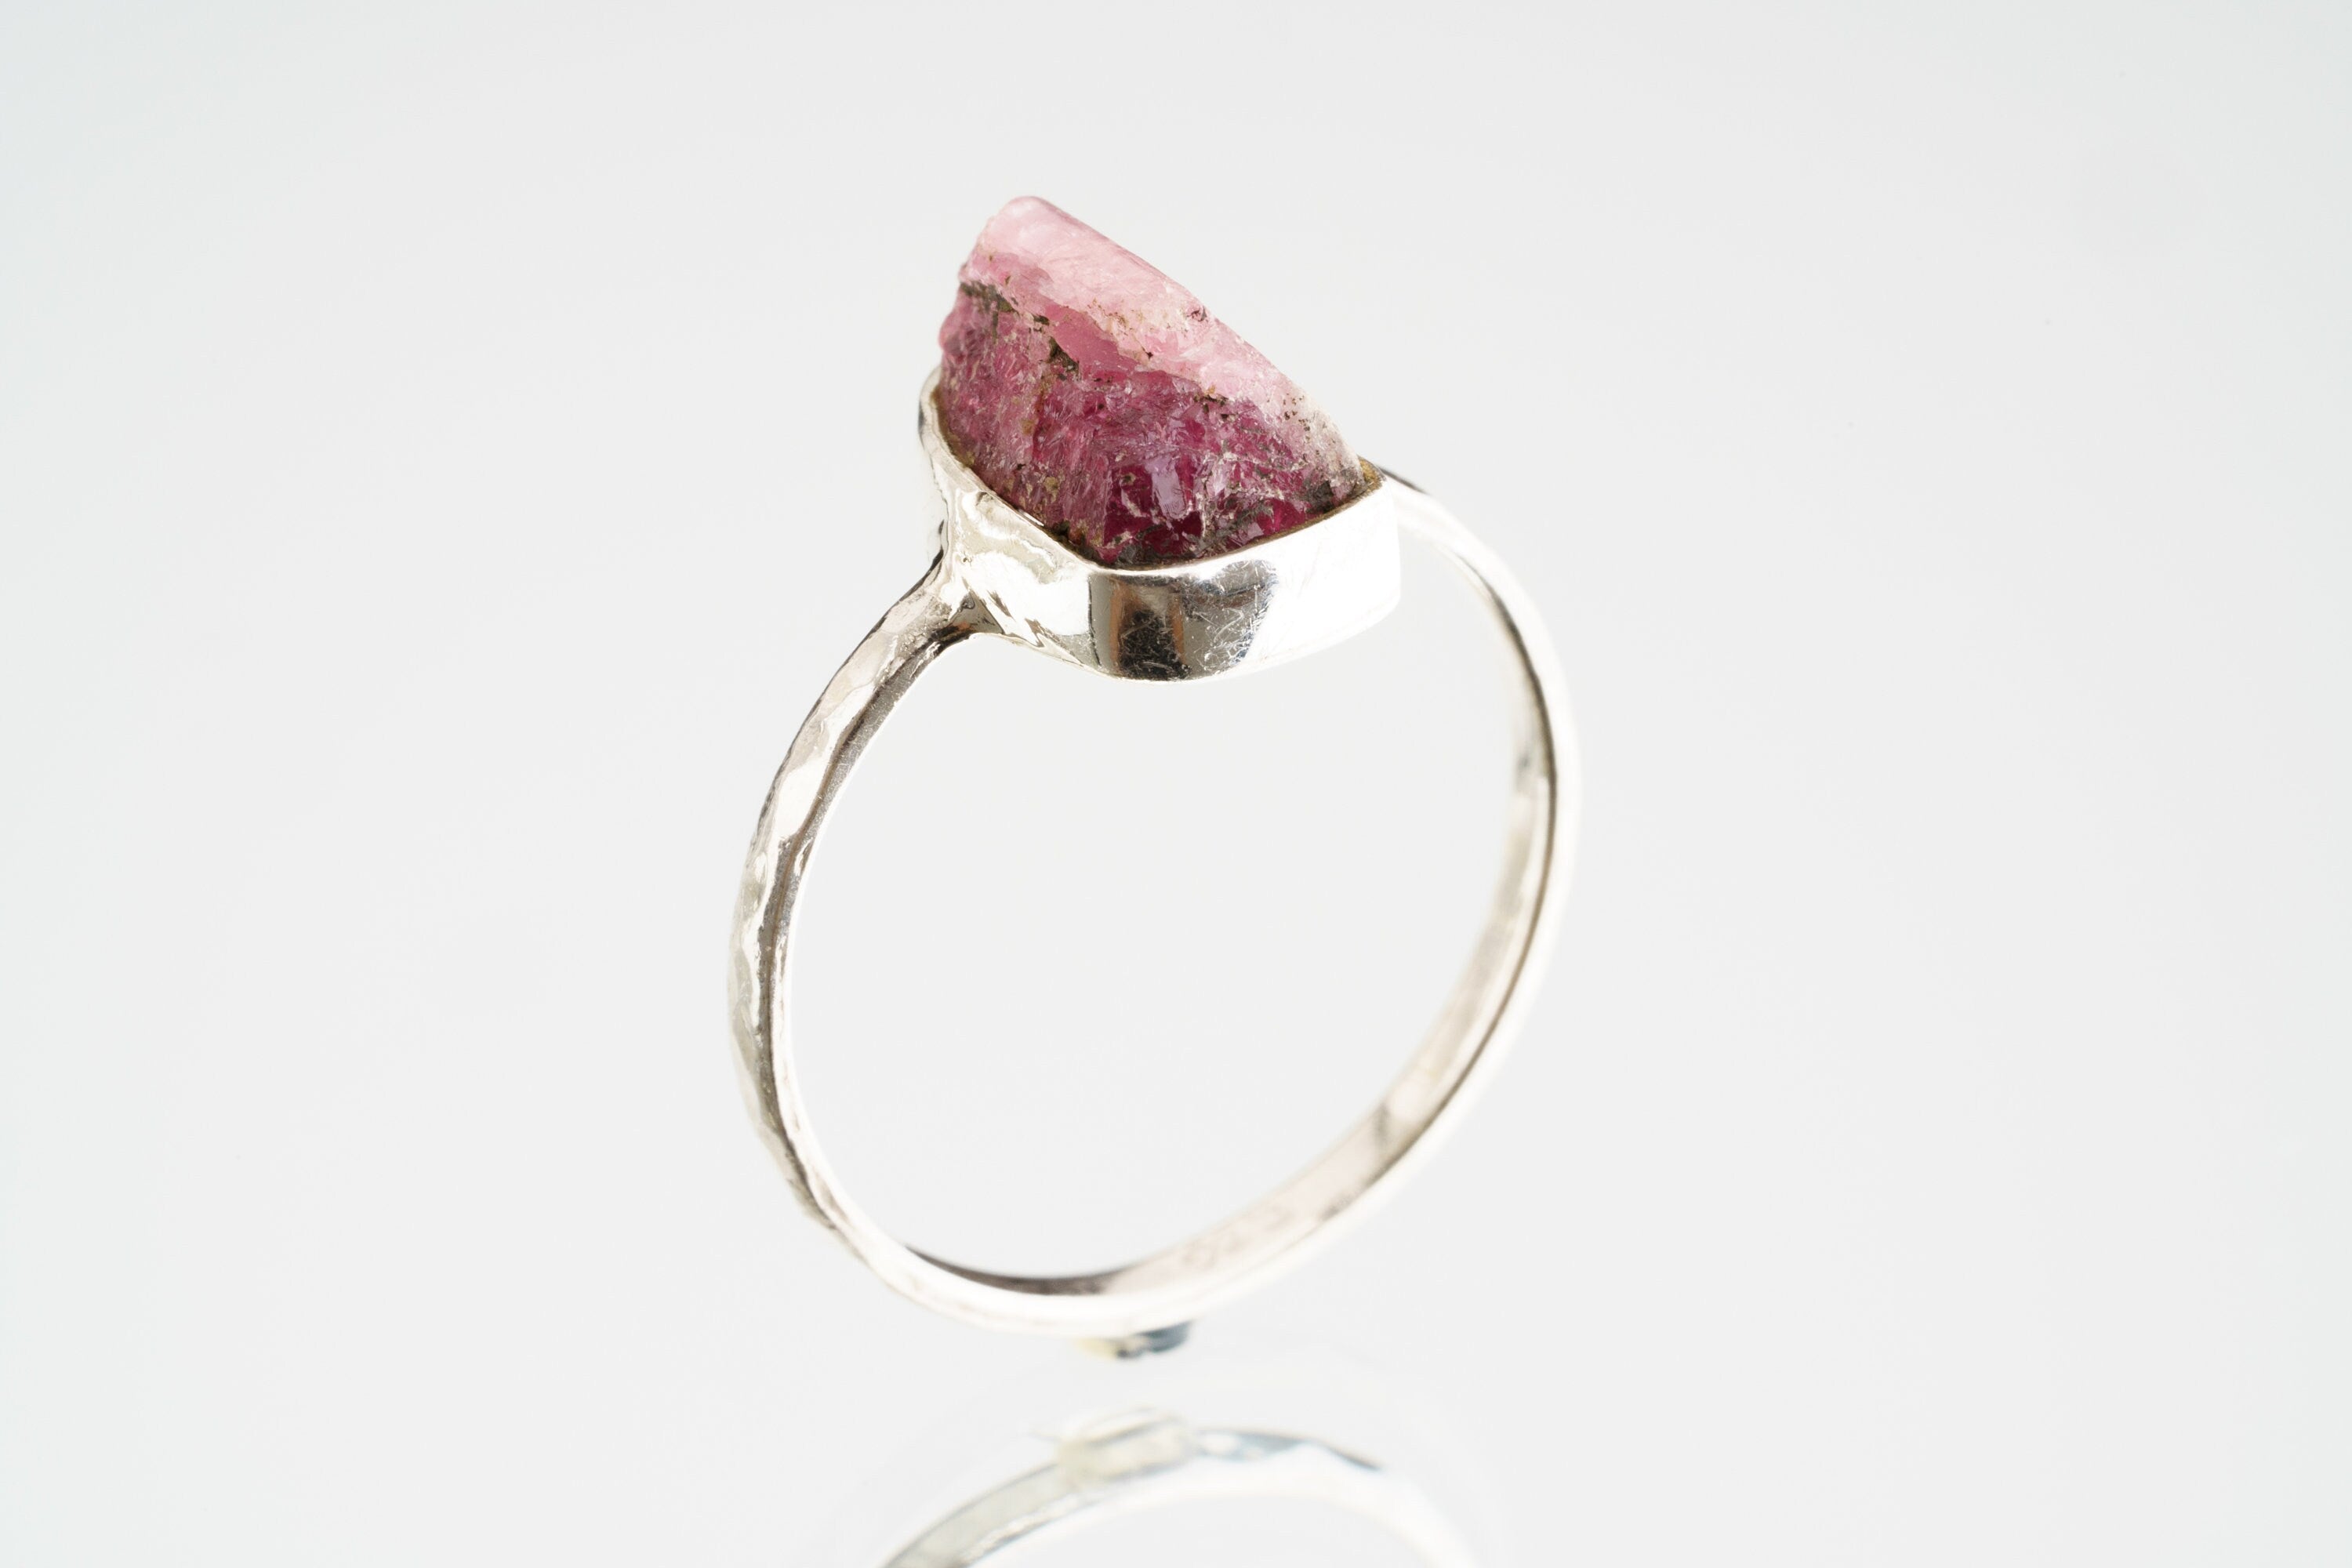 Pink gem Tourmaline Rubellite - Stack Crystal Ring - Size 6 US - 925 Sterling Silver - Thin Band Hammer Textured